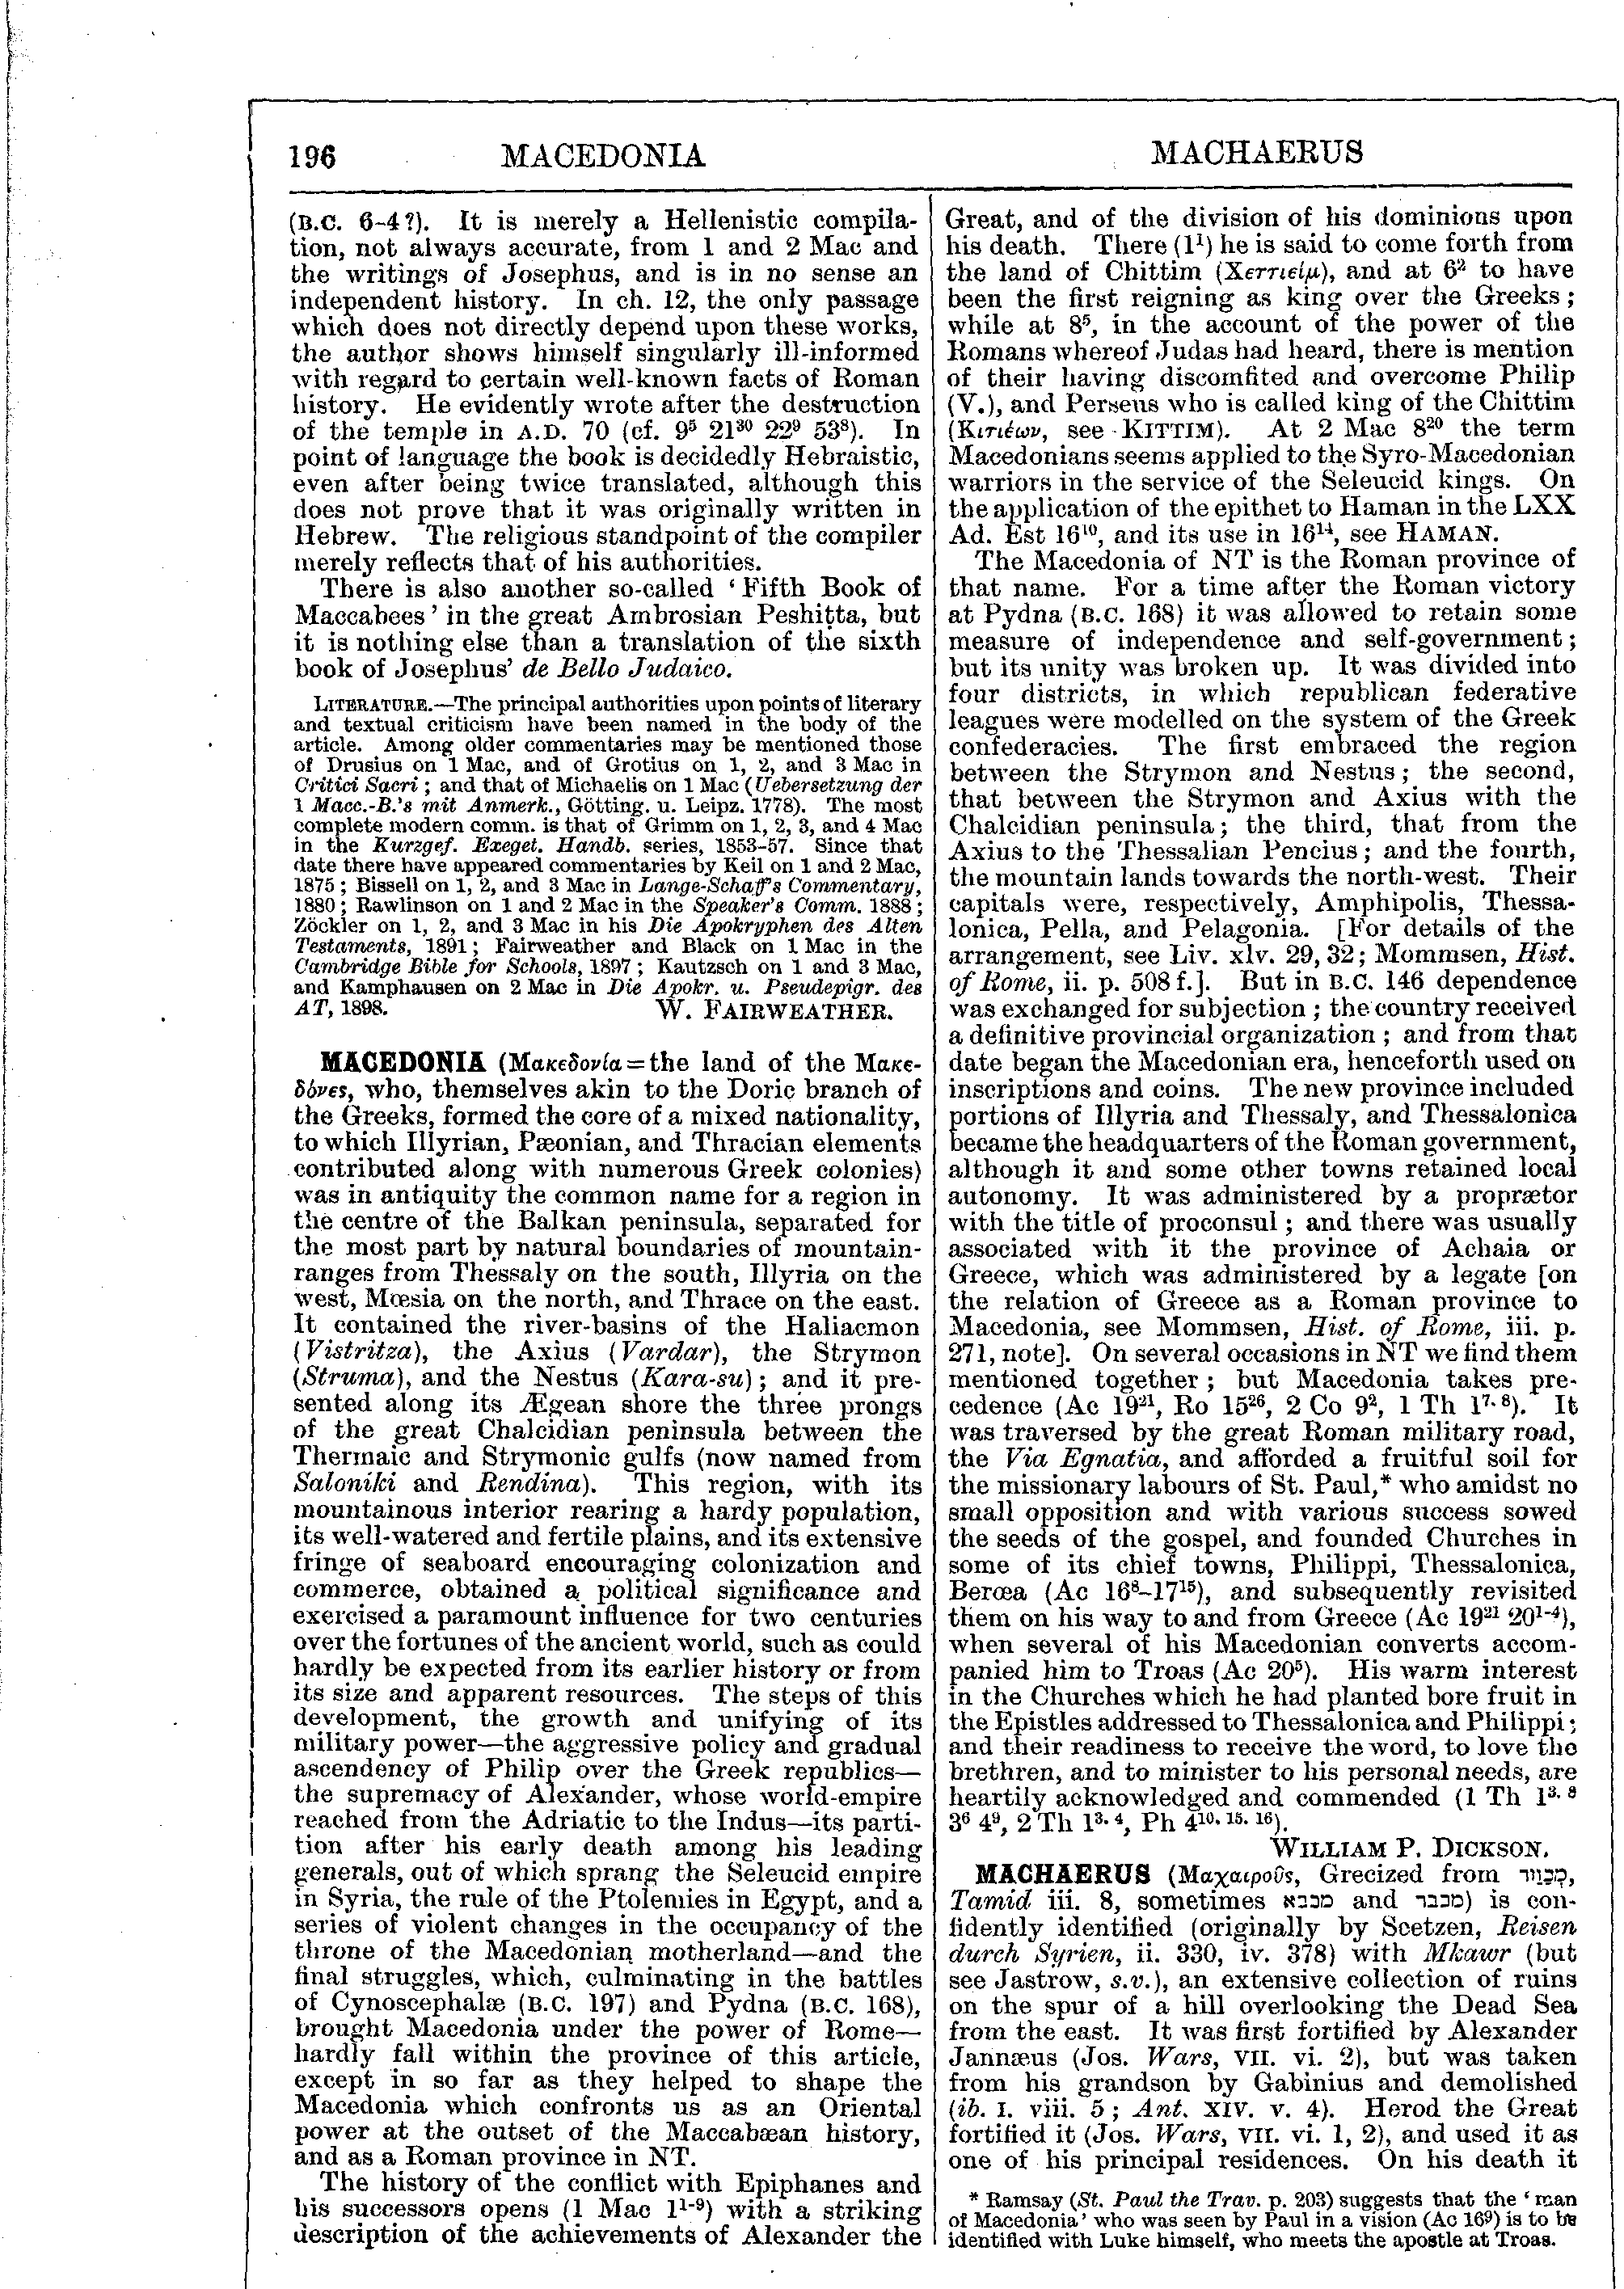 Image of page 196